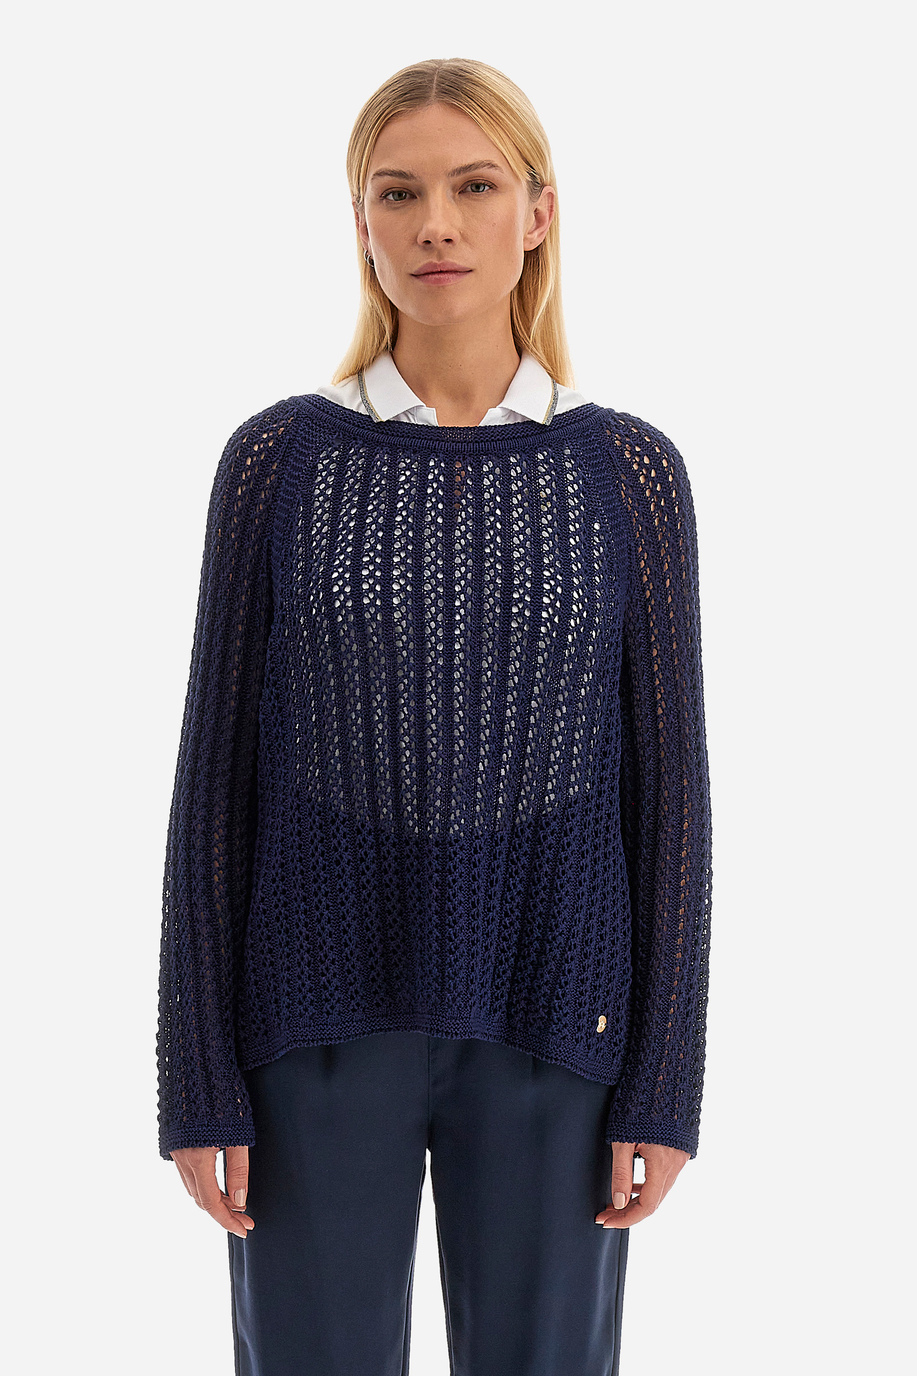 Women's round neck tricot sweater in solid color Spring Weekend capsule - Victoire - Our favourites for her | La Martina - Official Online Shop